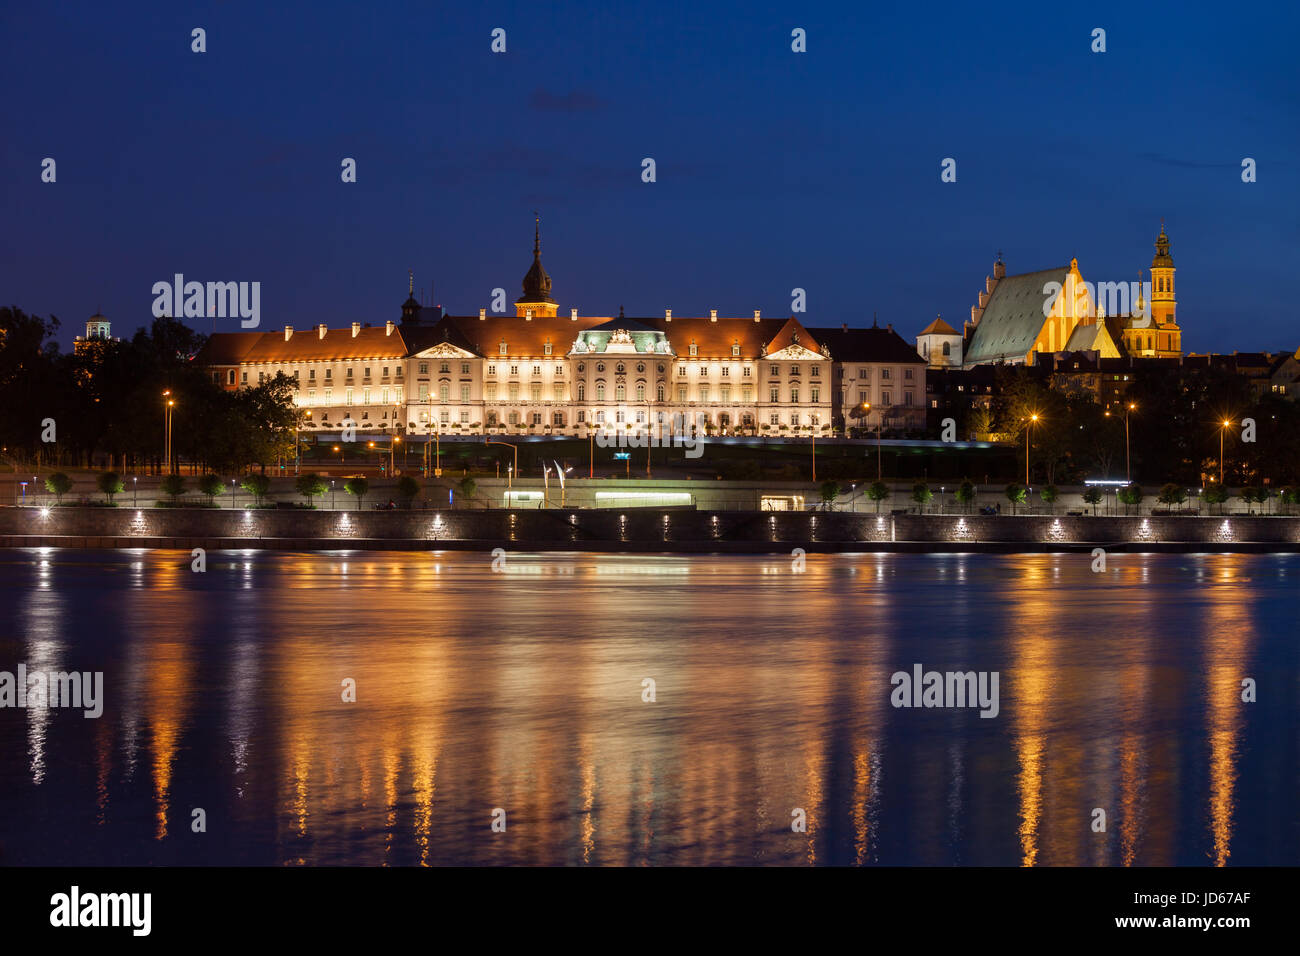 Royal Castle in city of Warsaw, Poland illuminated at night, historic city landmark, view across Vistula River, Baroque and Mannerist architecture Stock Photo